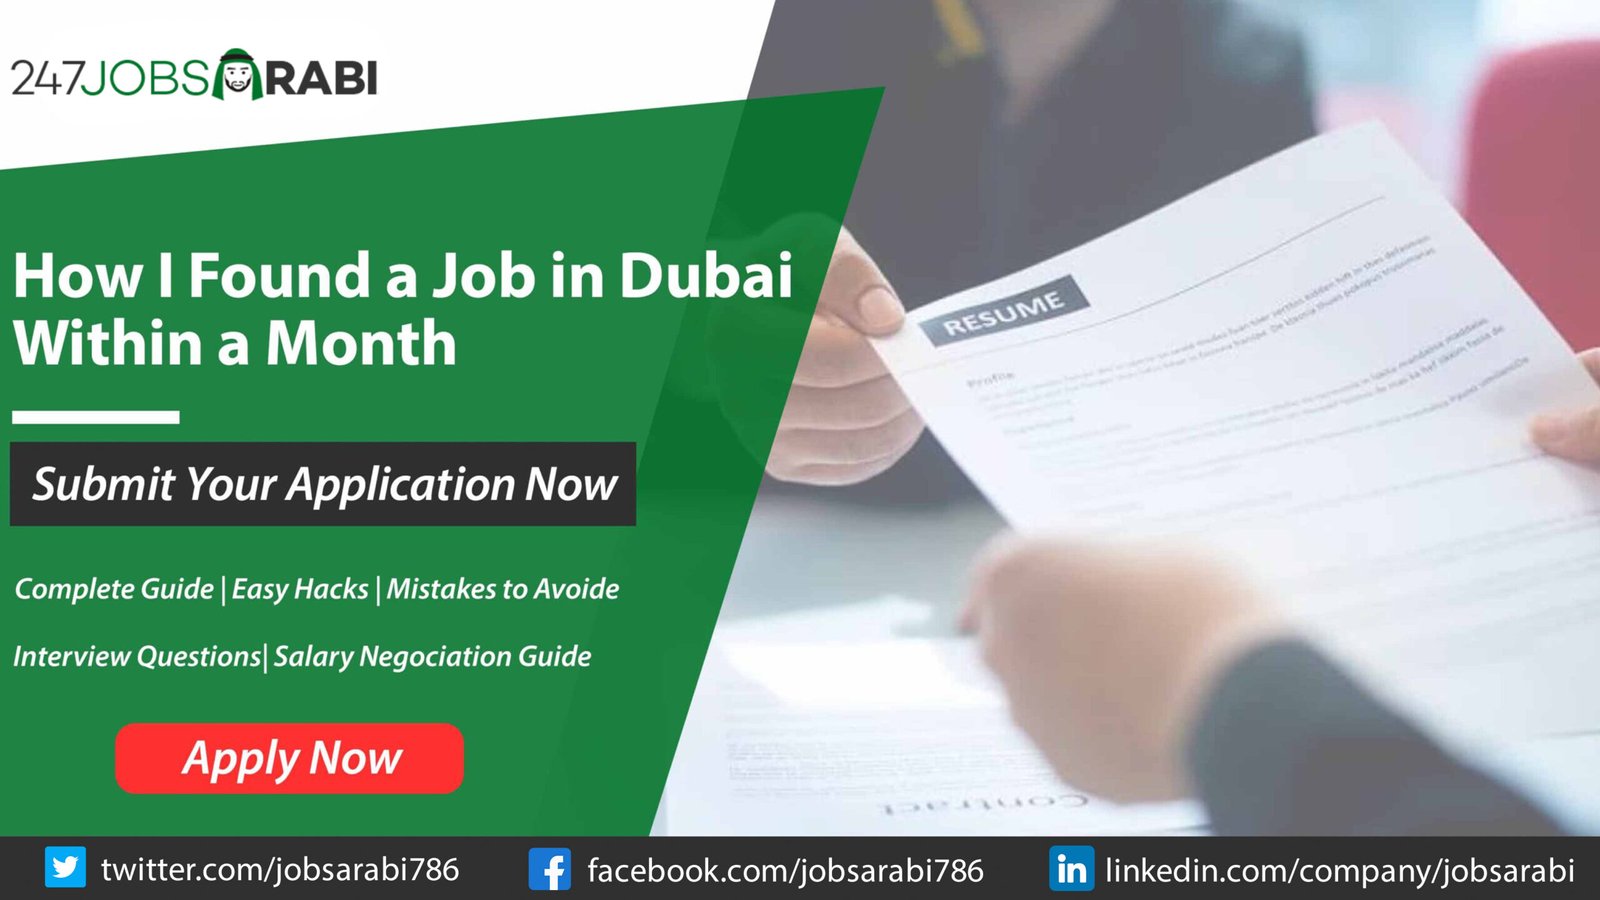 Find a Job in Dubai Within a Month